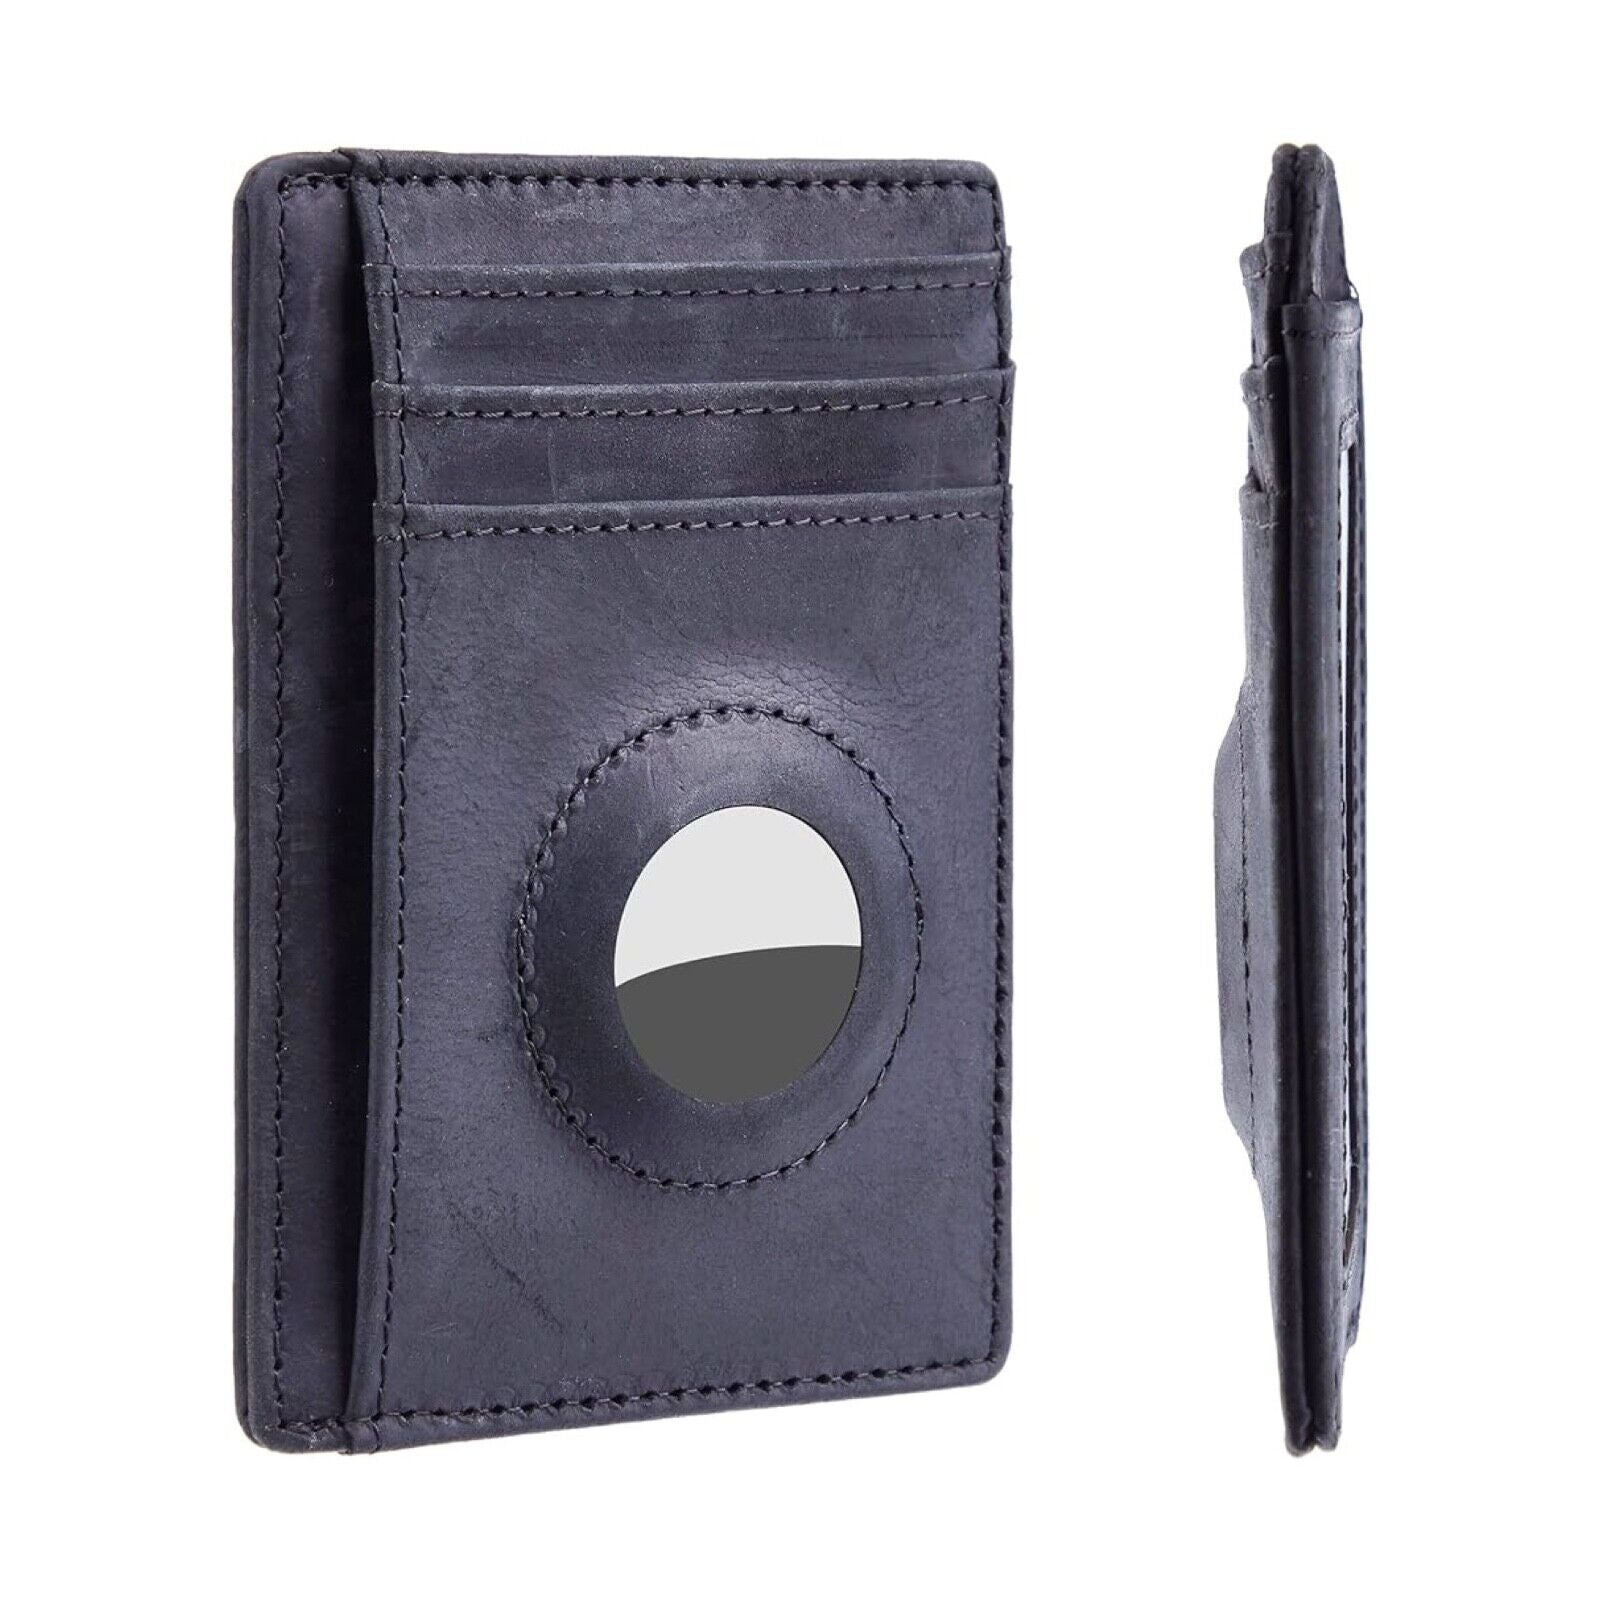 Slim Wallet for AirTag Genuine Leahter Front Pocket Minimalist Wallet